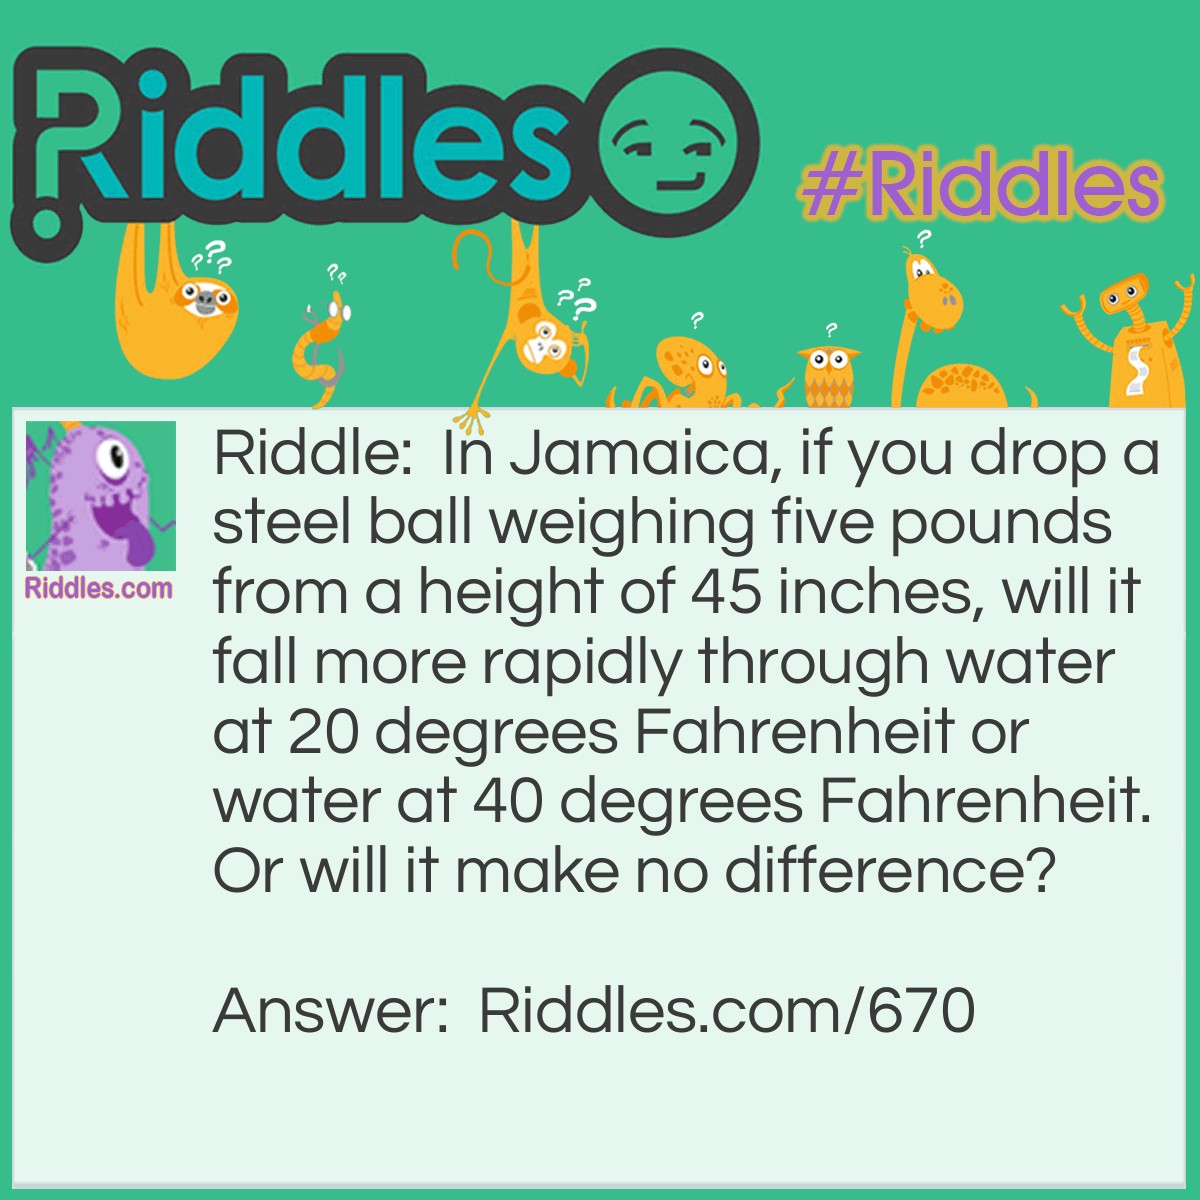 Riddle: In Jamaica, if you drop a steel ball weighing five pounds from a height of 45 inches, will it fall more rapidly through water at 20 degrees Fahrenheit or water at 40 degrees Fahrenheit. Or will it make no difference? Answer: 40 degrees Fahrenheit. At 20 degrees Fahrenheit the water would be ice.